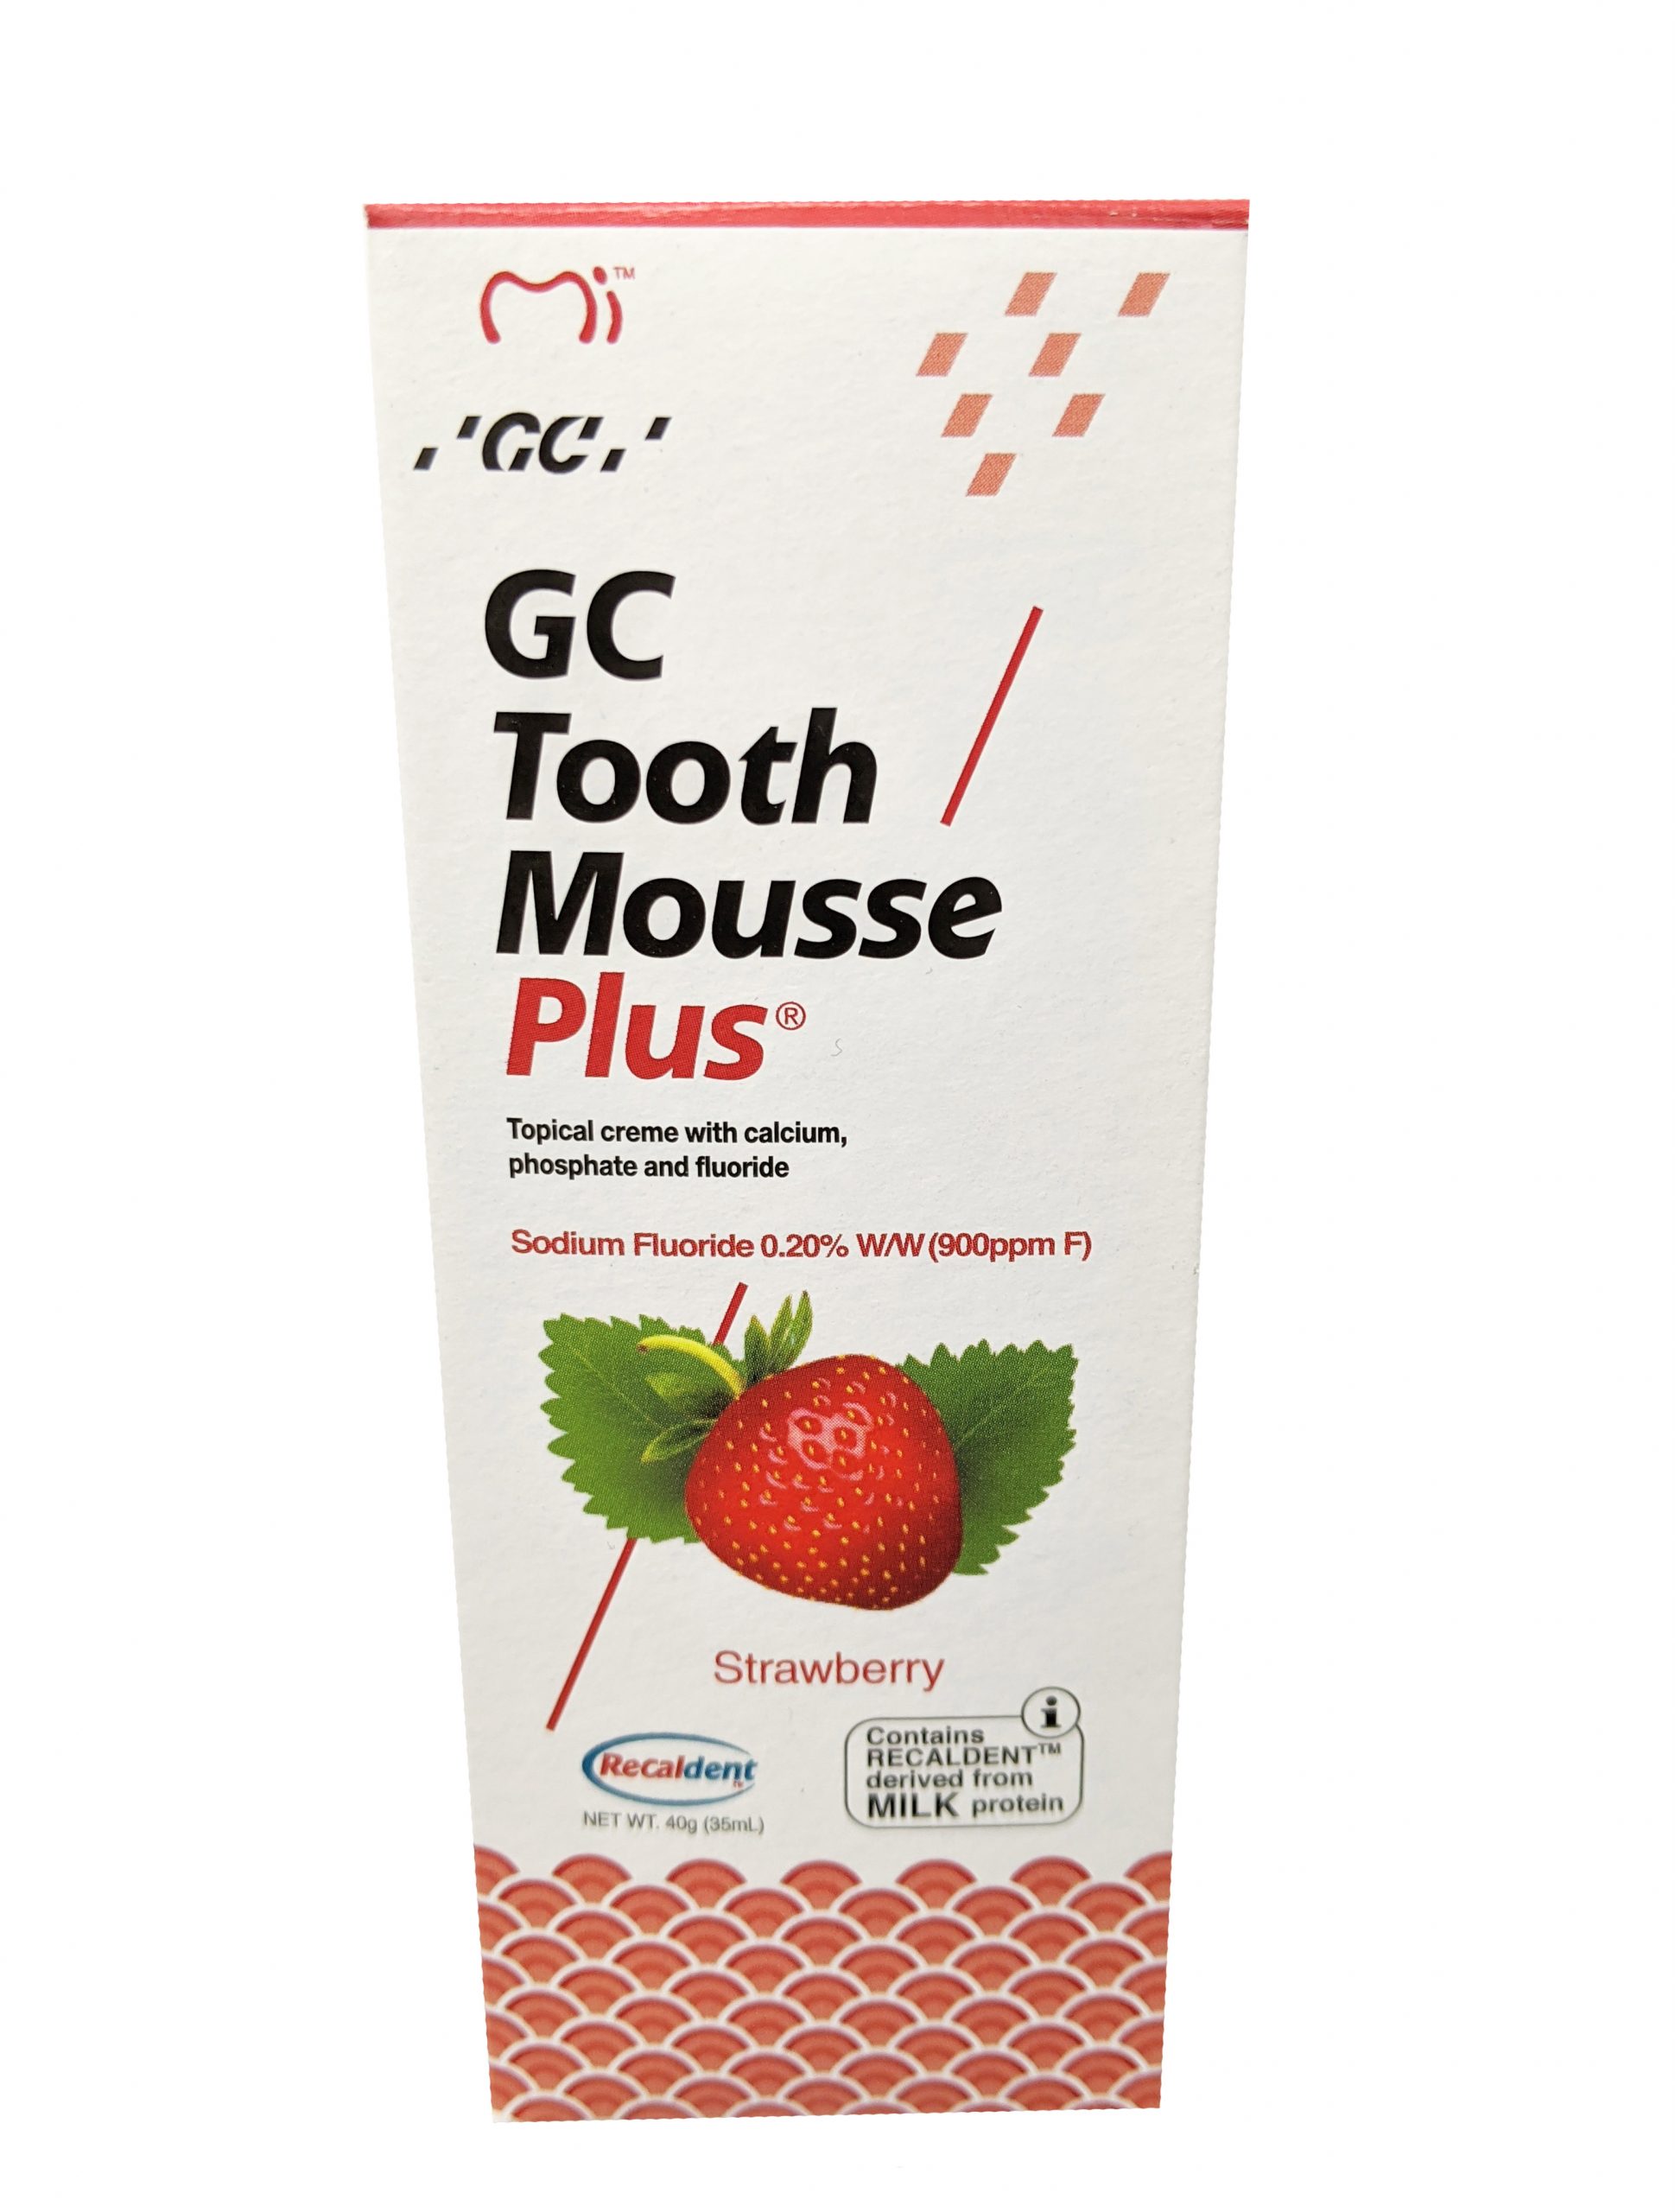 GC Tooth Mousse Plus - Strawberry